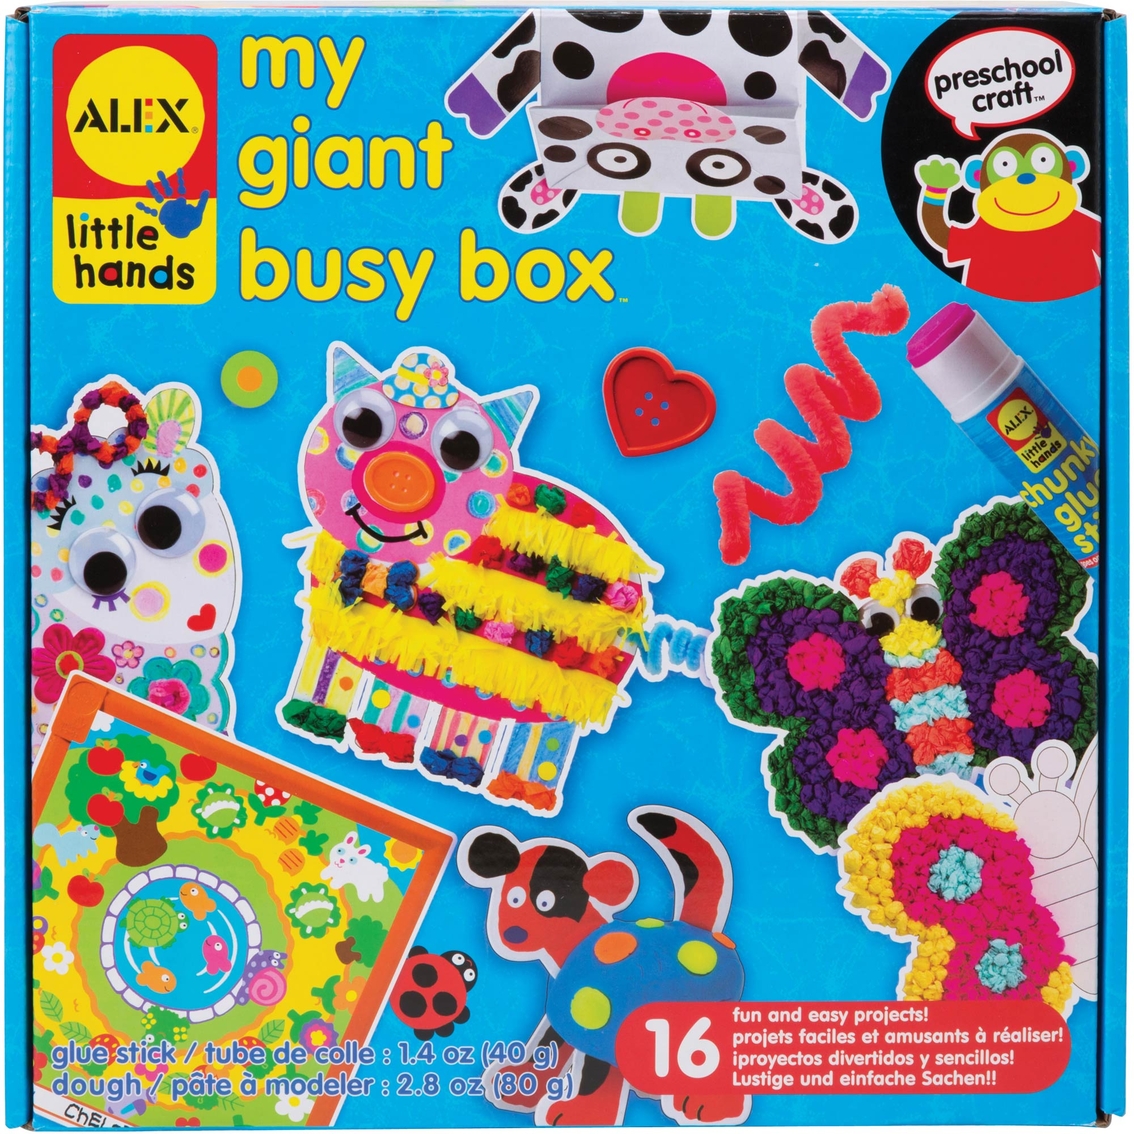 giant busy box